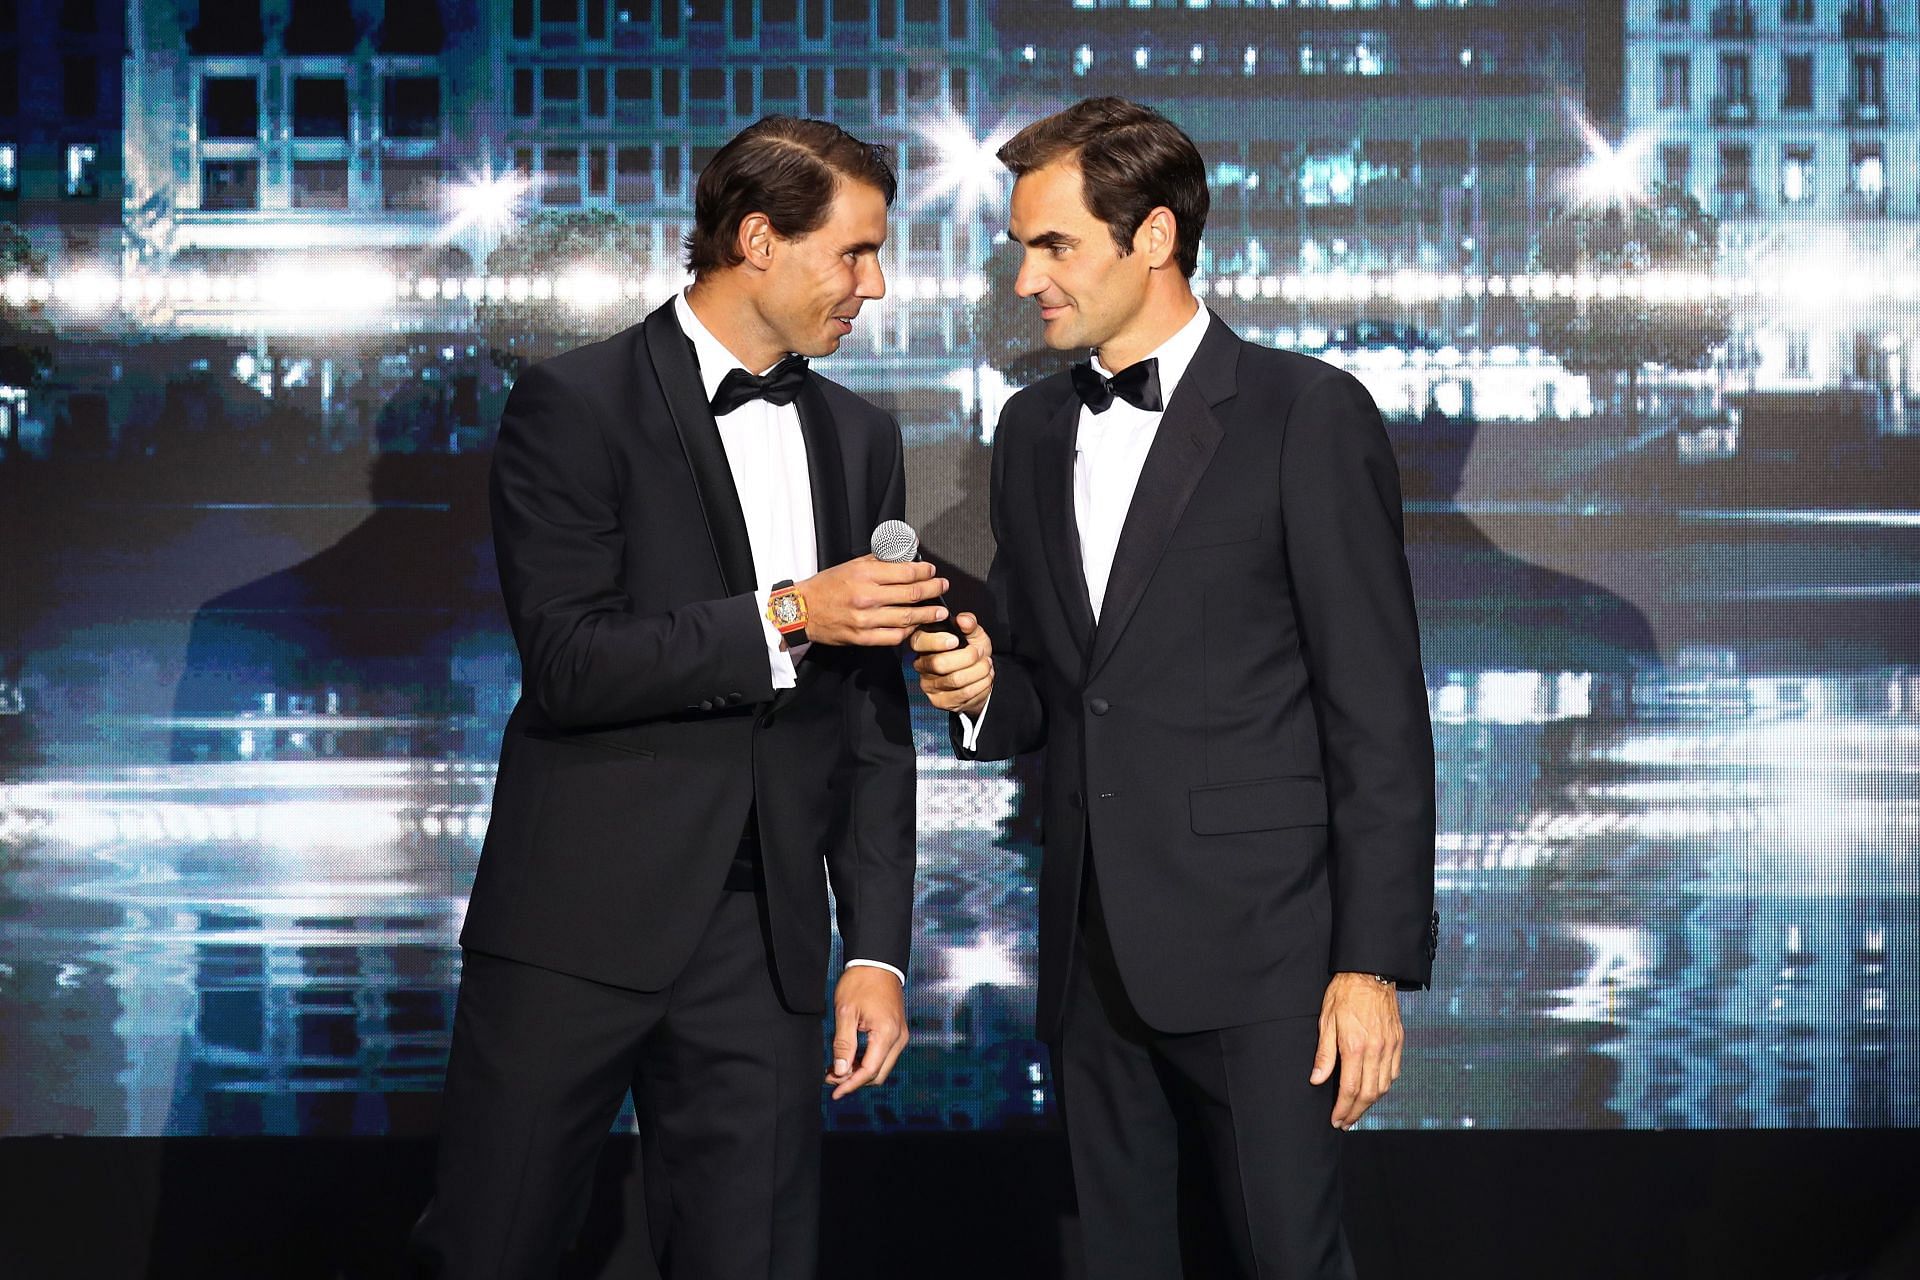 Rafael Nadal and Roger Federer at the Laver Cup 2019 - Preview